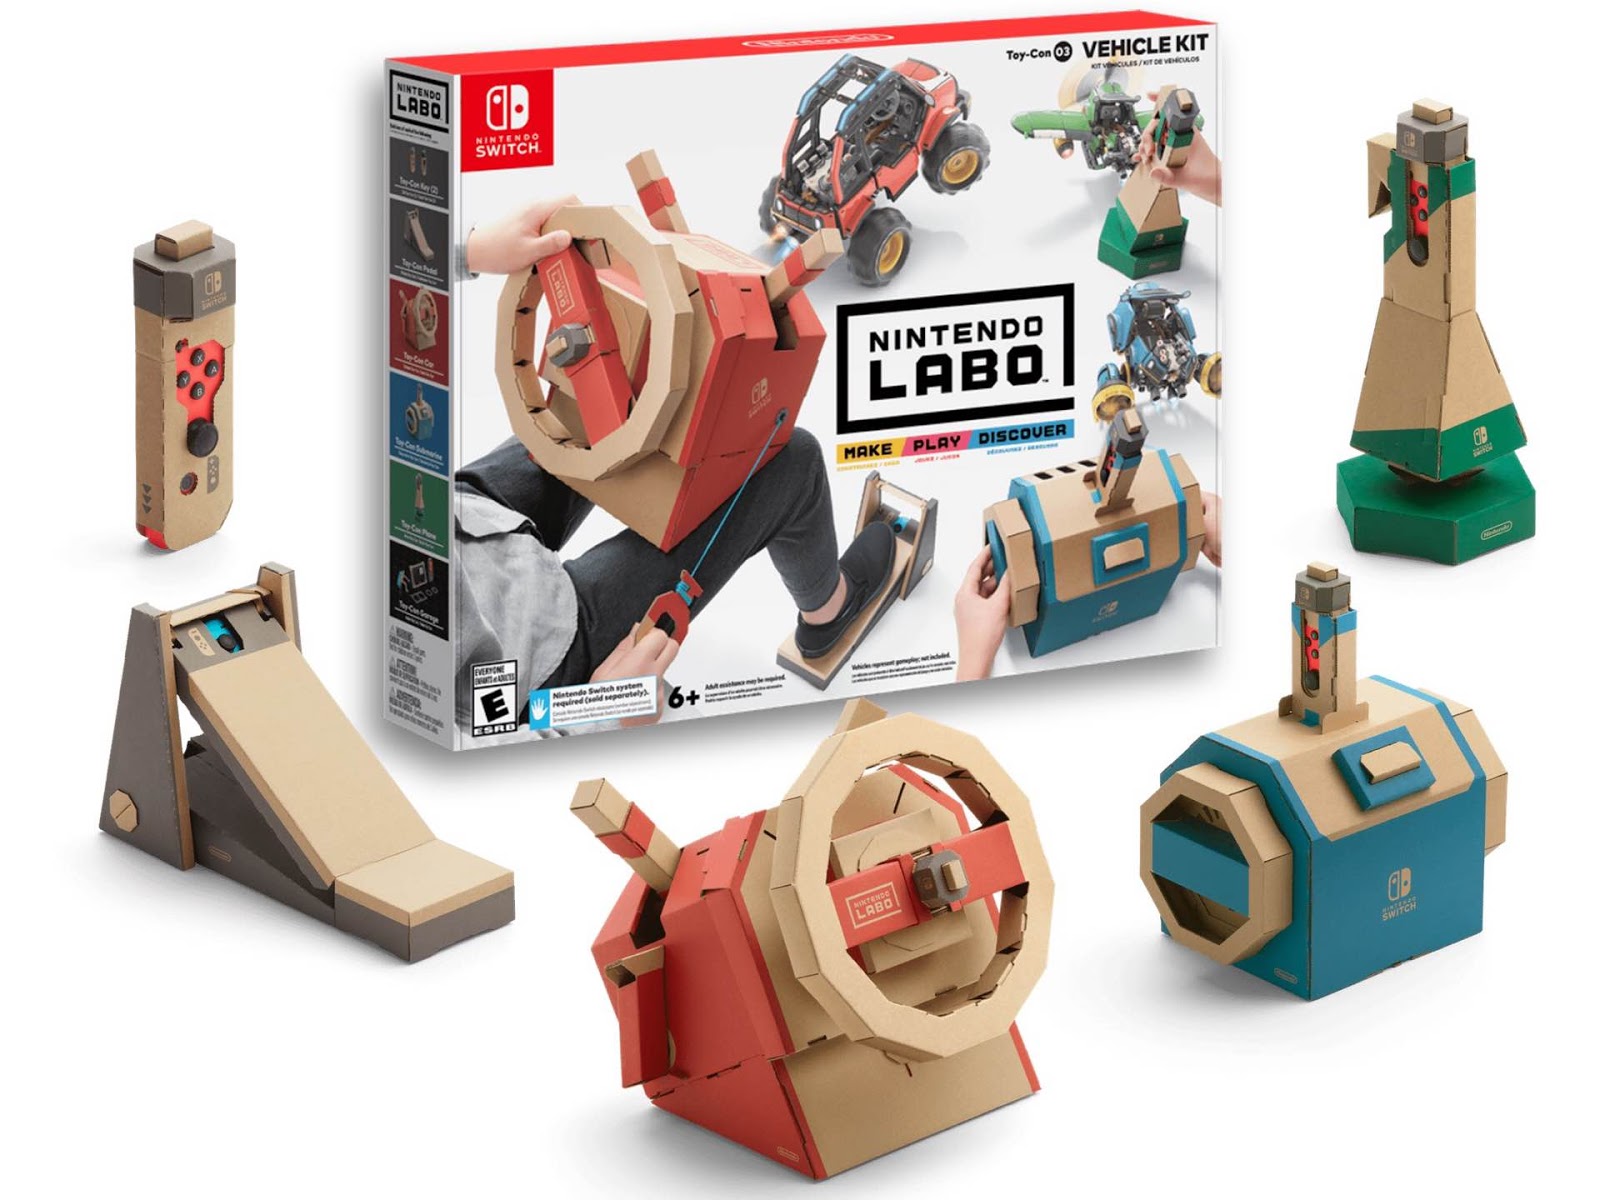 Som dæmning Grønland SuperPhillip Central: Nintendo Labo Toy-Con 03: Vehicle Kit (NSW) Review